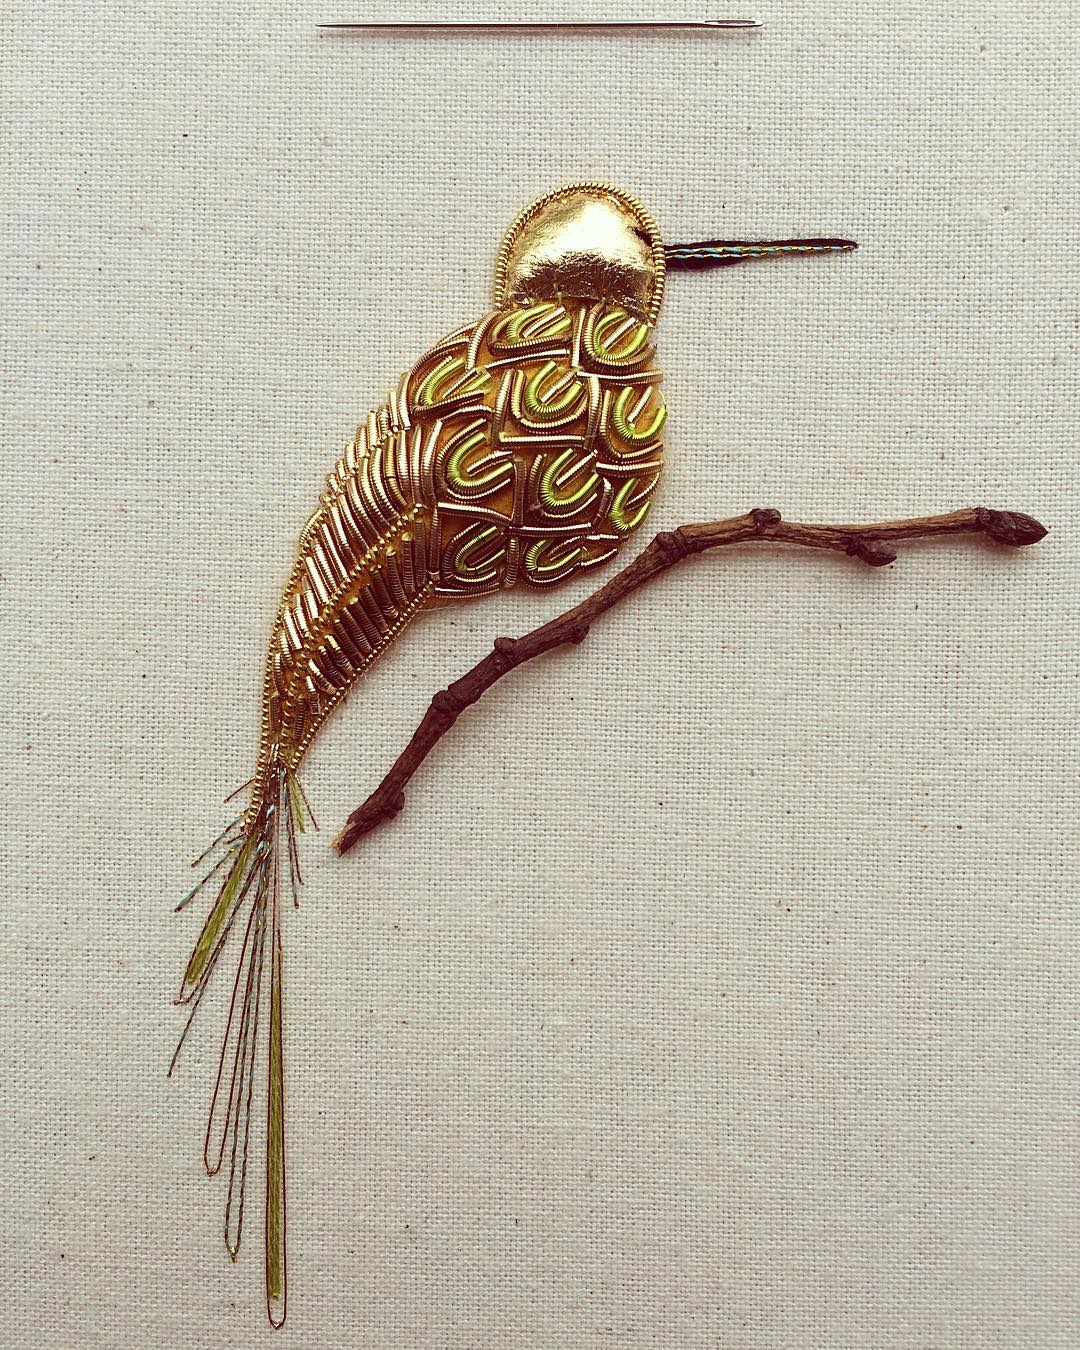 Beautiful Bird And Insect Embroideries Decorated With Metallic Beads By Humayrah Bint Altaf 14